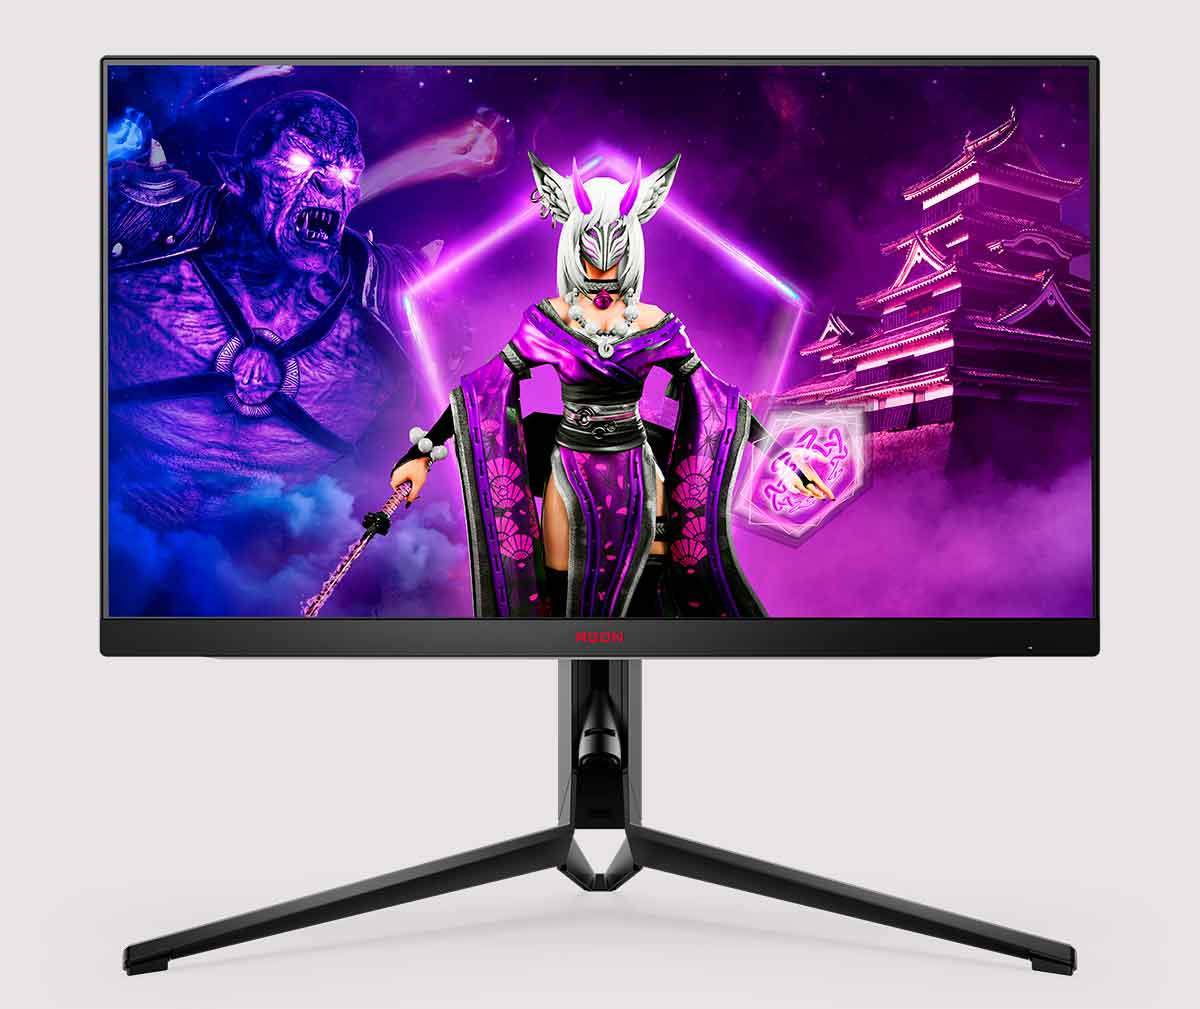 AGON by AOC reinforces its high-end gaming monitors